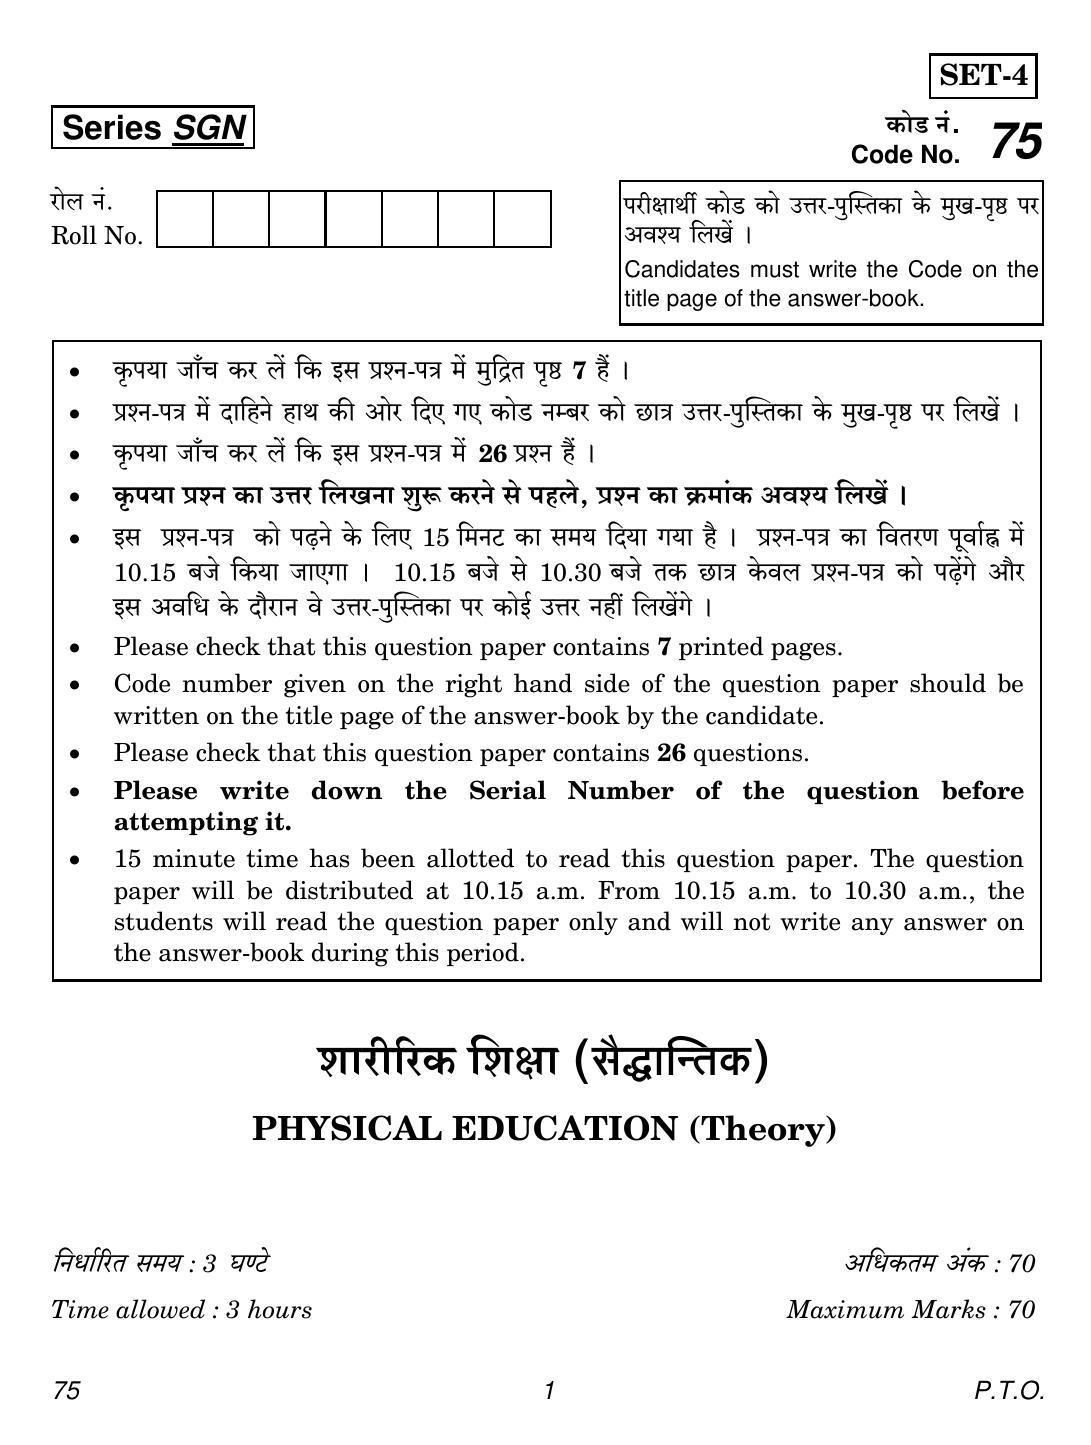 CBSE Class 12 75 Physical Education 2018 Question Paper - Page 1